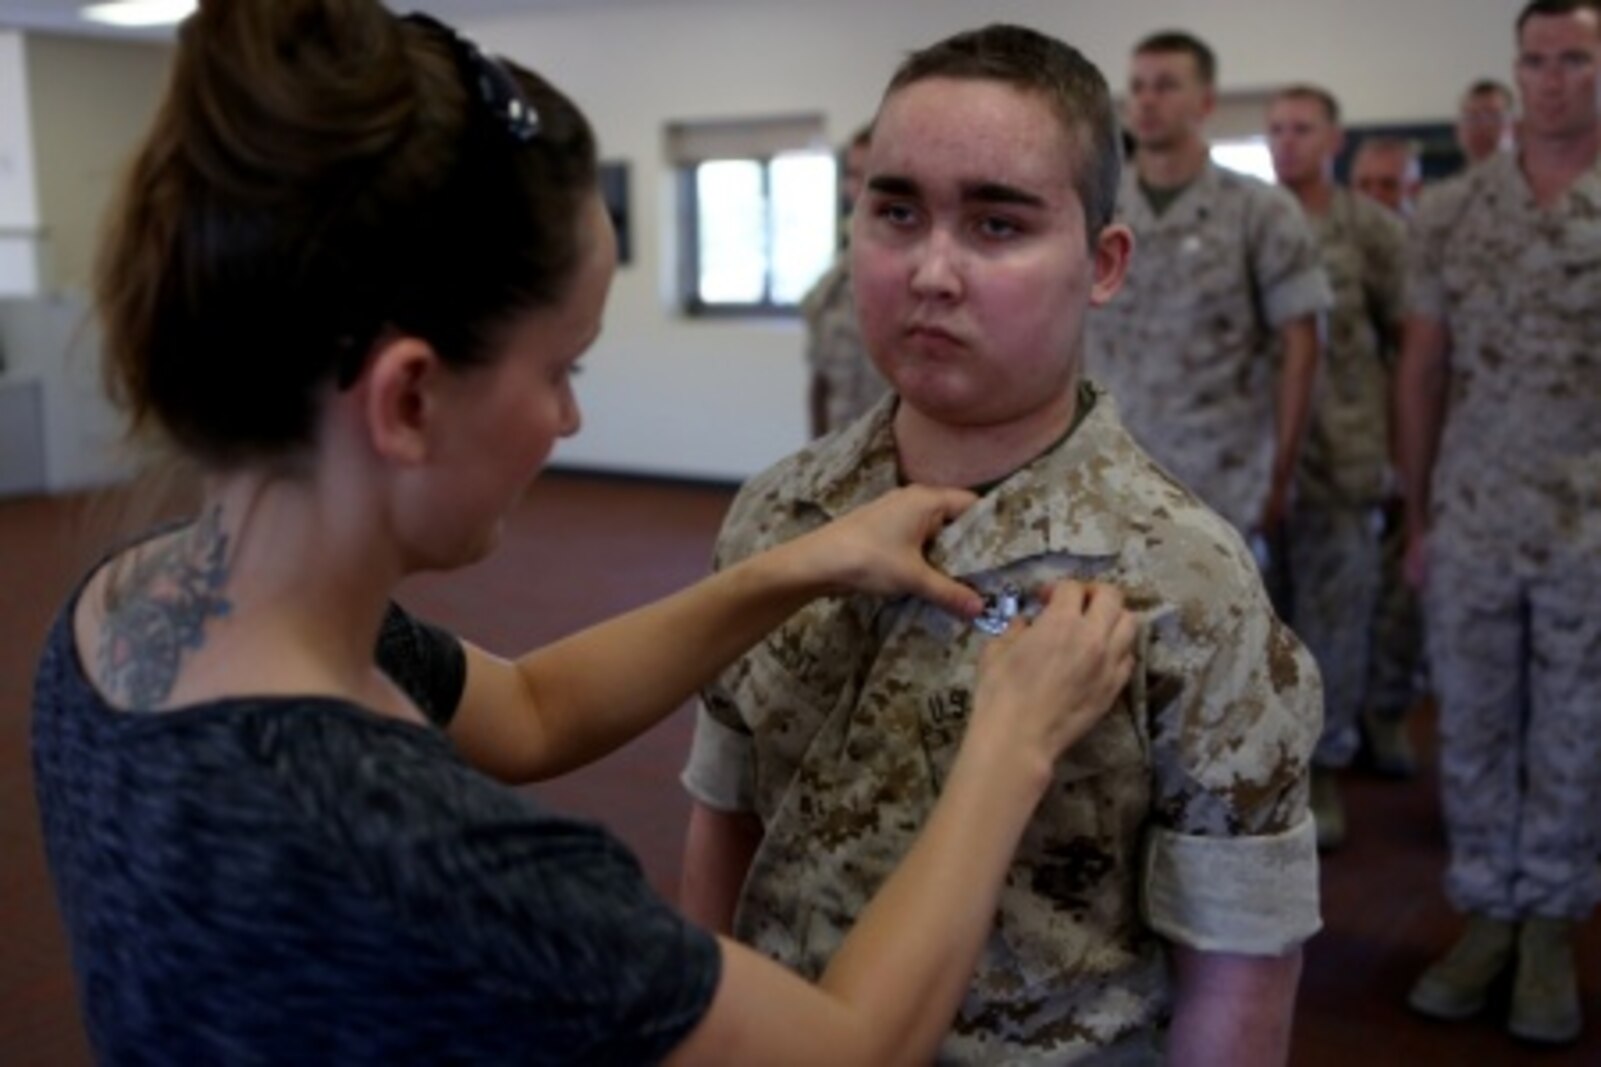 James Gallant, a young man diagnosed with brain cancer, is pinned with an Explosive Ordnance Disposal technician badge by his mother Sarah Silverstein, before Marines of 1st EOD Company, 1st Marine Logistics Group, aboard Camp Pendleton, Calif., July 25, 2015. Collaborating with the Make-A-Wish Foundation, 1st EOD helped James experience what being an EOD technician is like by giving him a tour through their library of ordnance and EOD tools, teaching him to operate the TALON bomb disposing robot and presenting him with his own desert utilities and EOD badge.